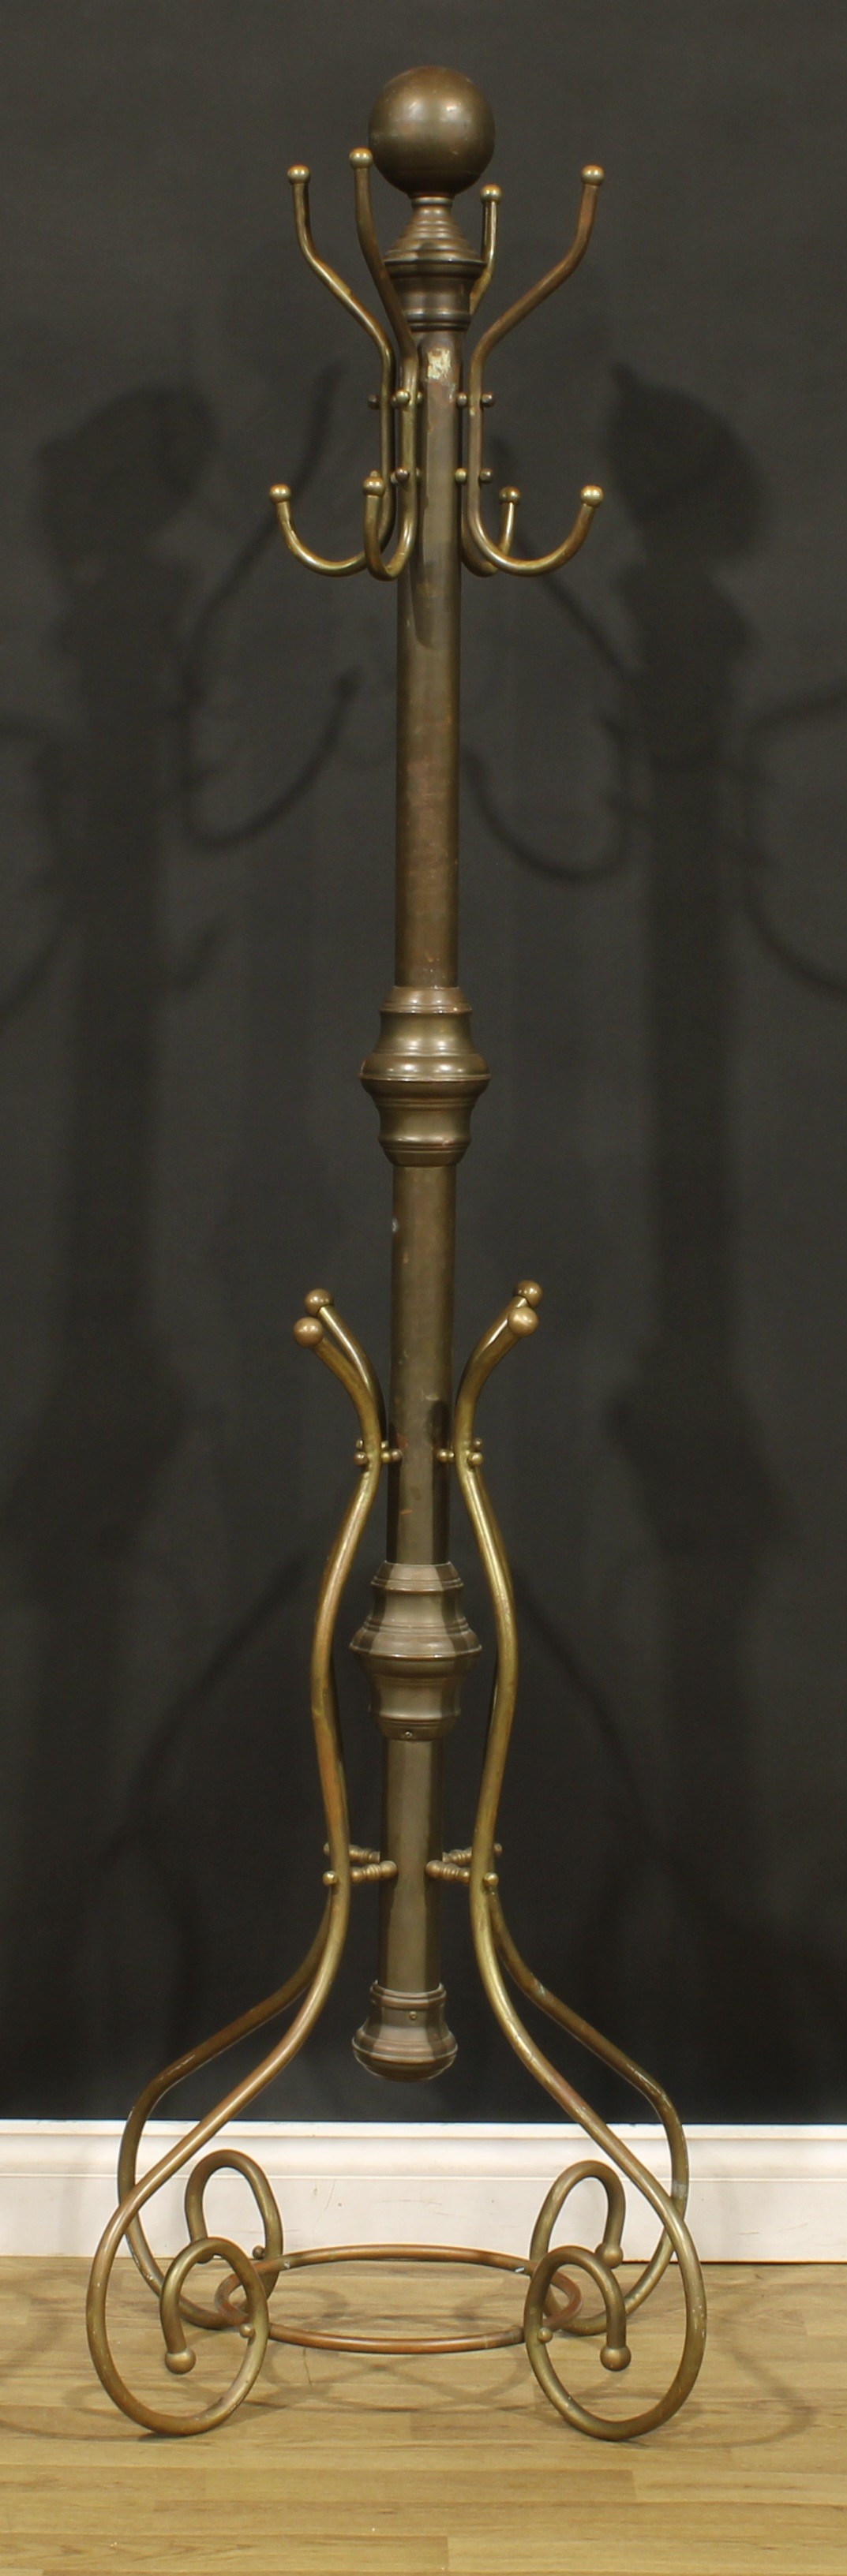 An early 20th century brass coat and hat stand, possibly American, sphere finial above four - Image 2 of 3